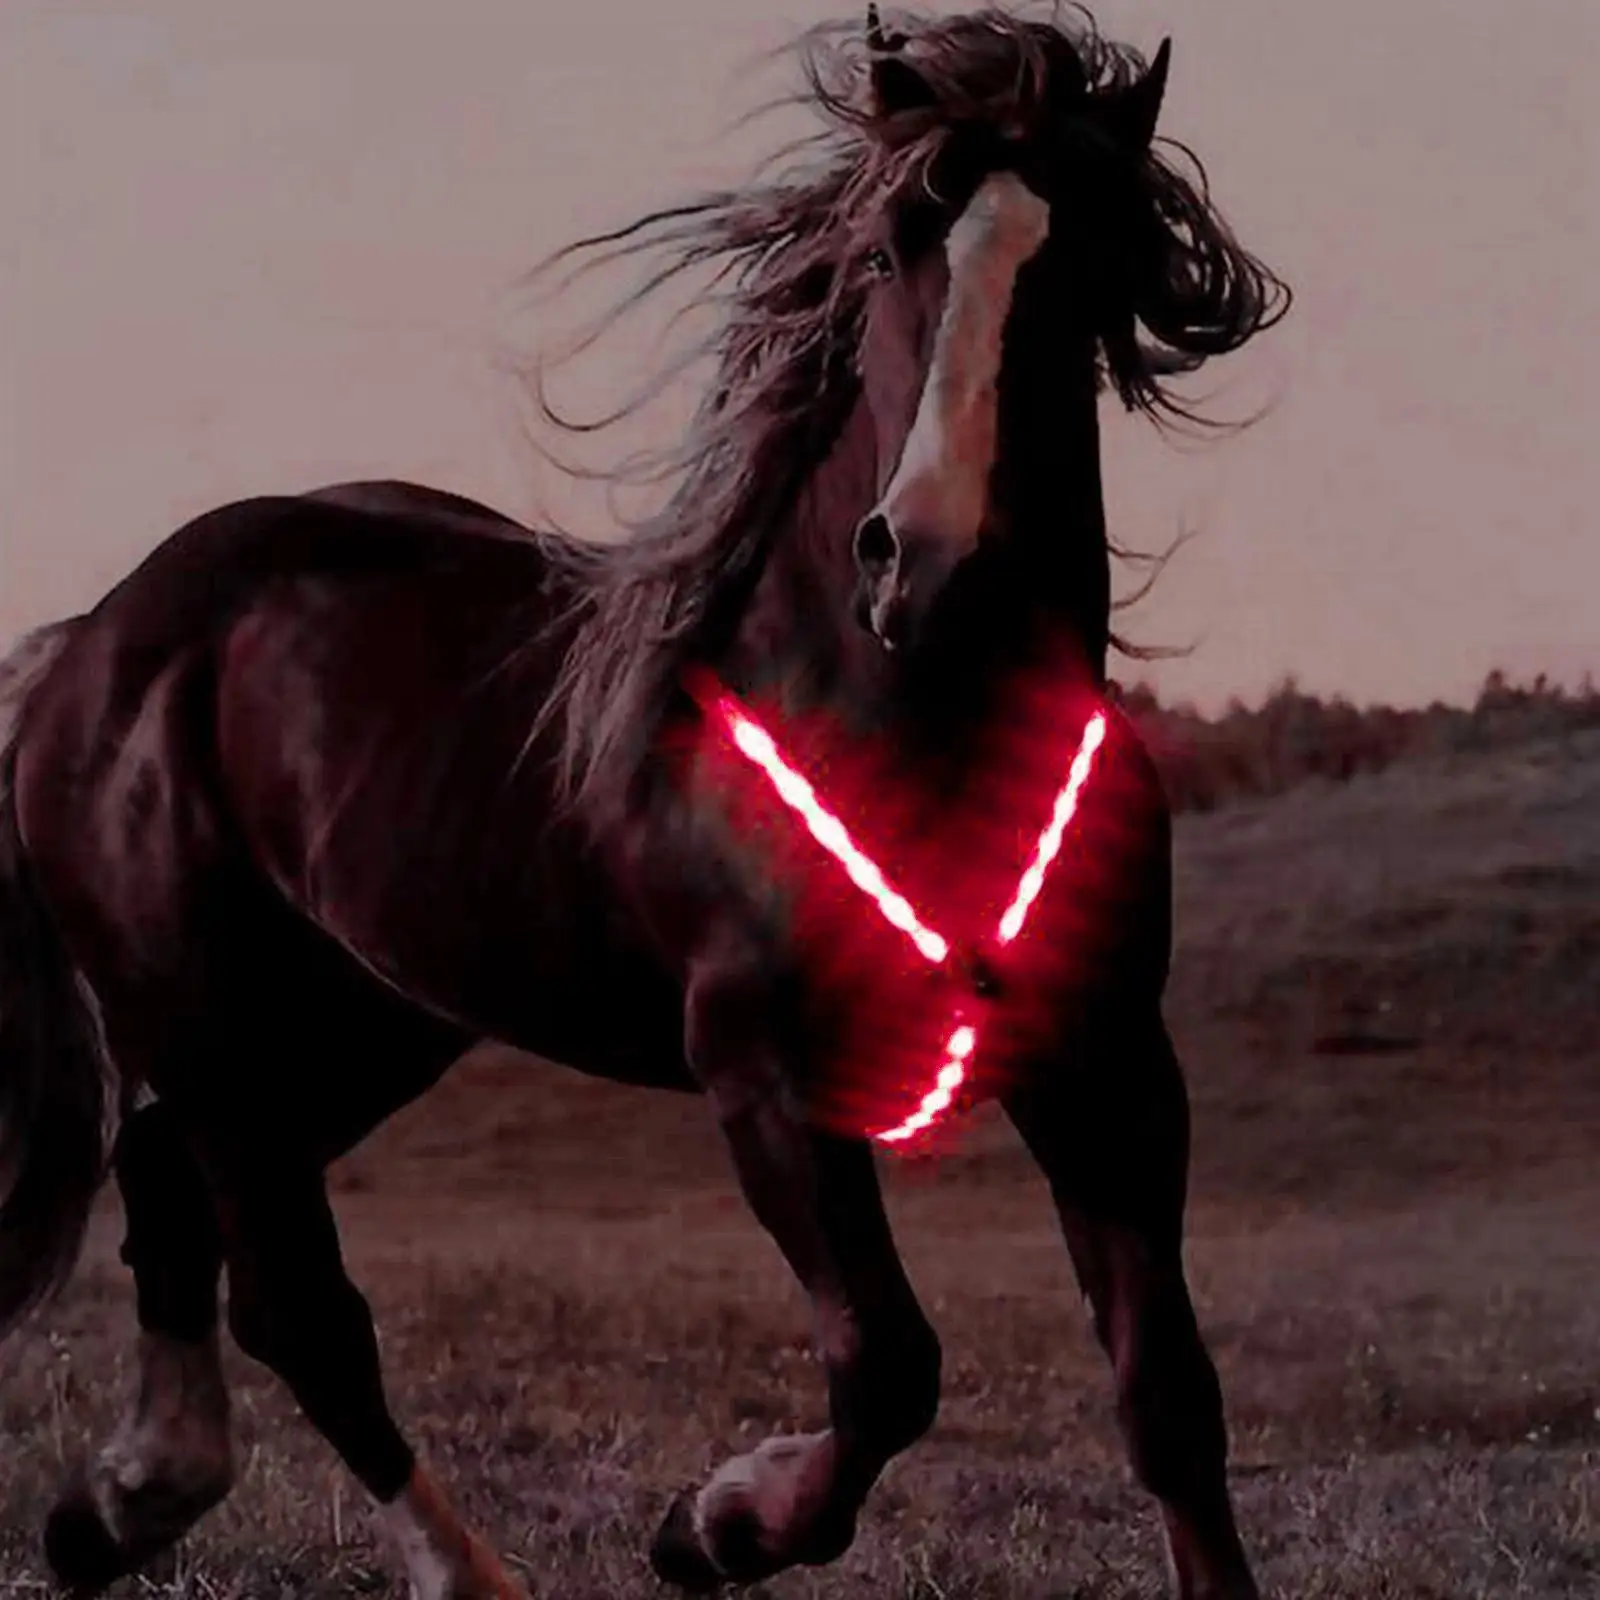 Outdoor Adjustable LED Horse Breastplate Collar Equestrian Safety Equipment Night Visible Horse Chest Harness Protective Belt